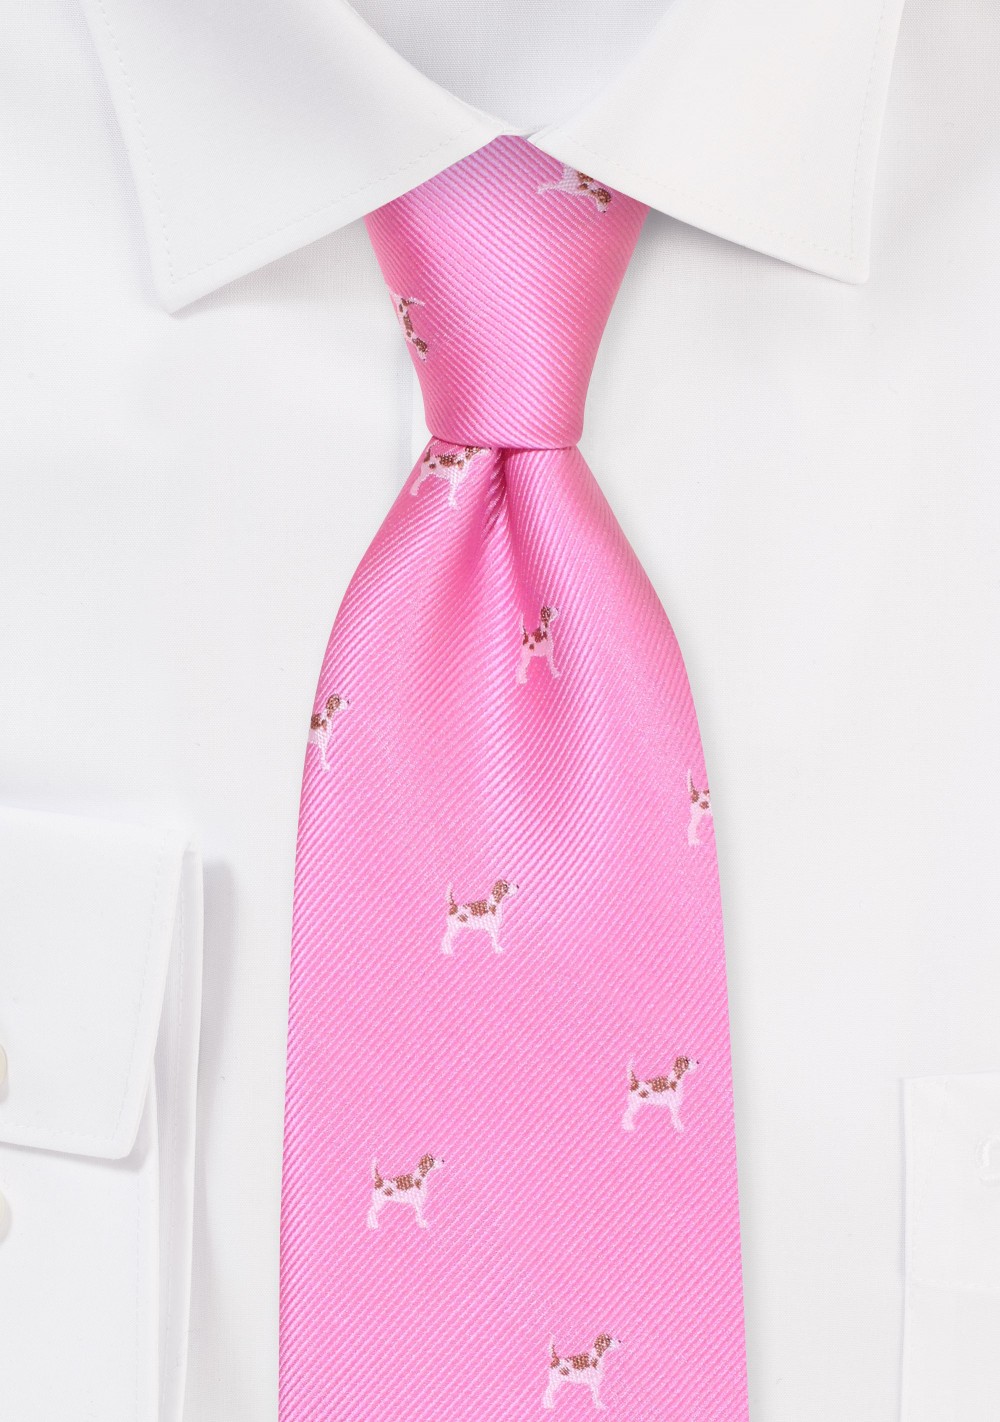 Pink Kids Tie with Dogs